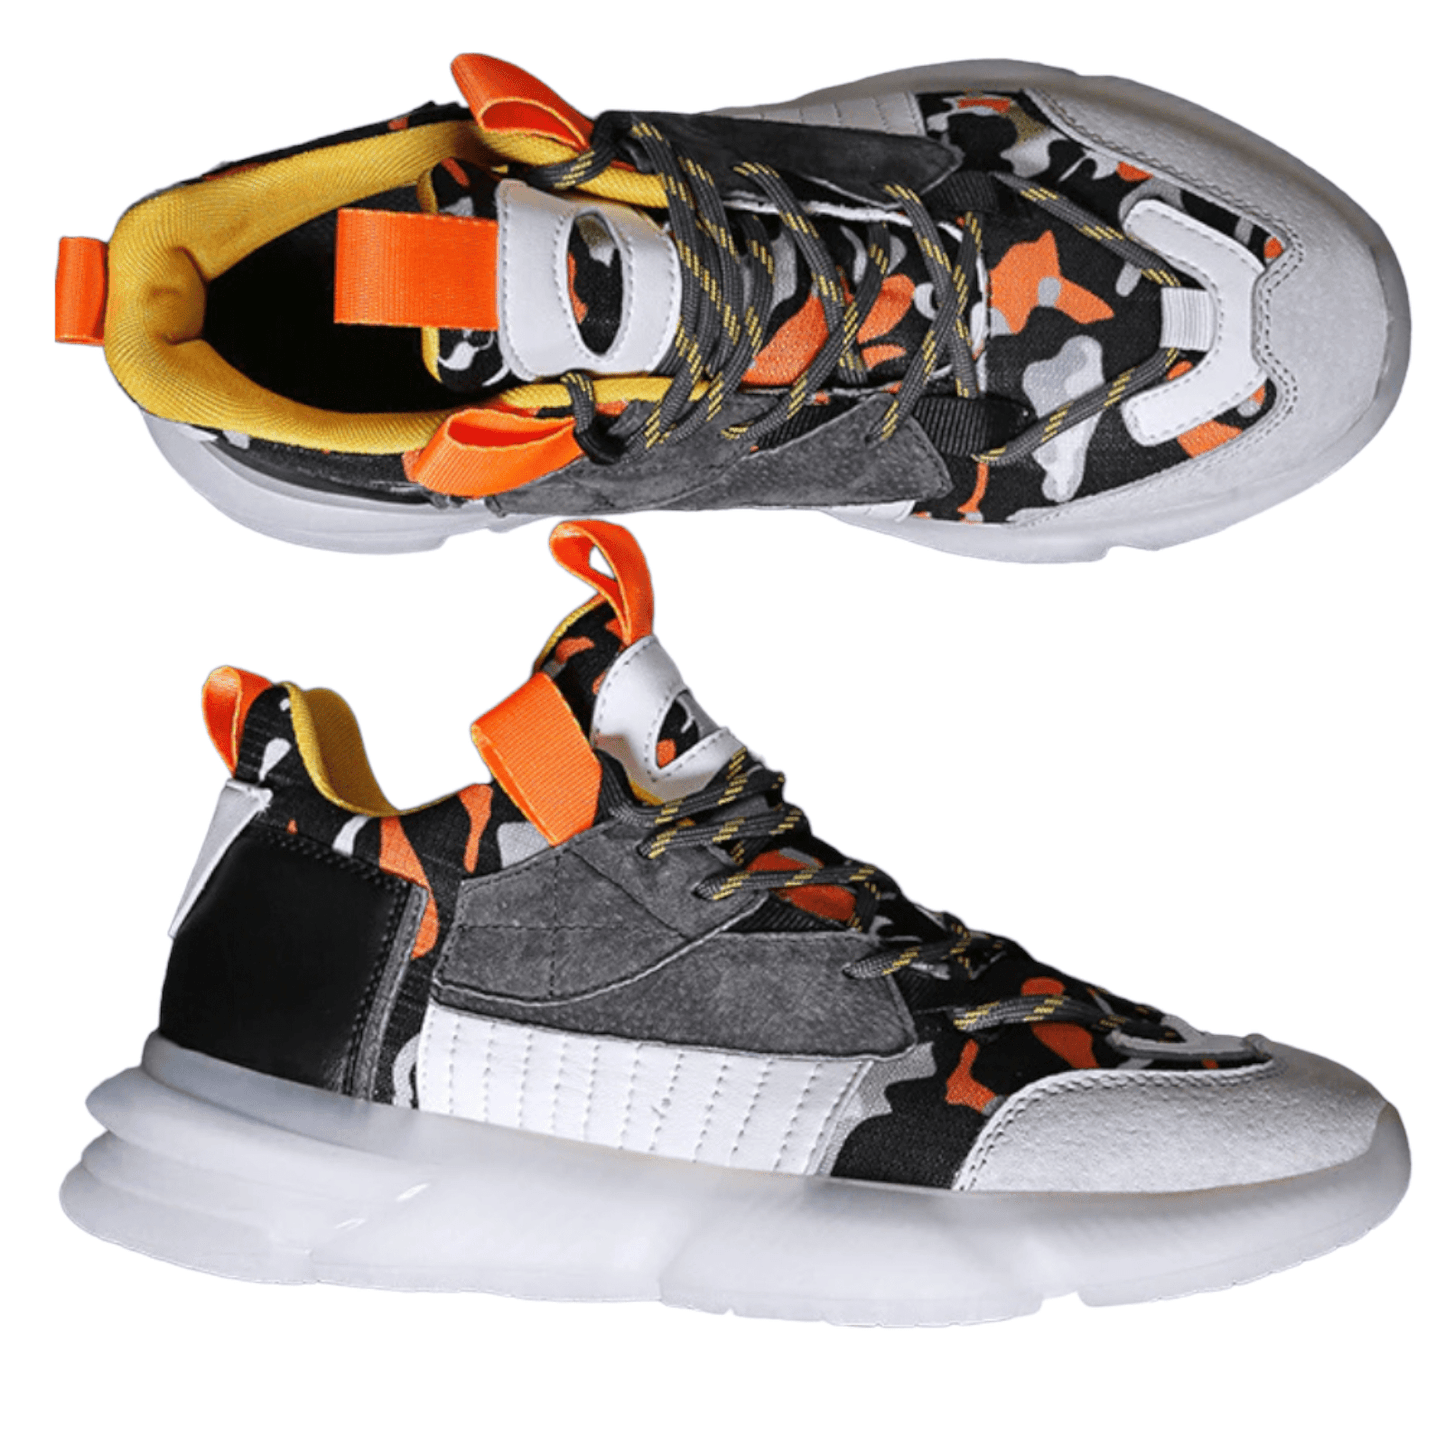 white orange sneakers prowl flashlander right side and view from above men's fashion shoes